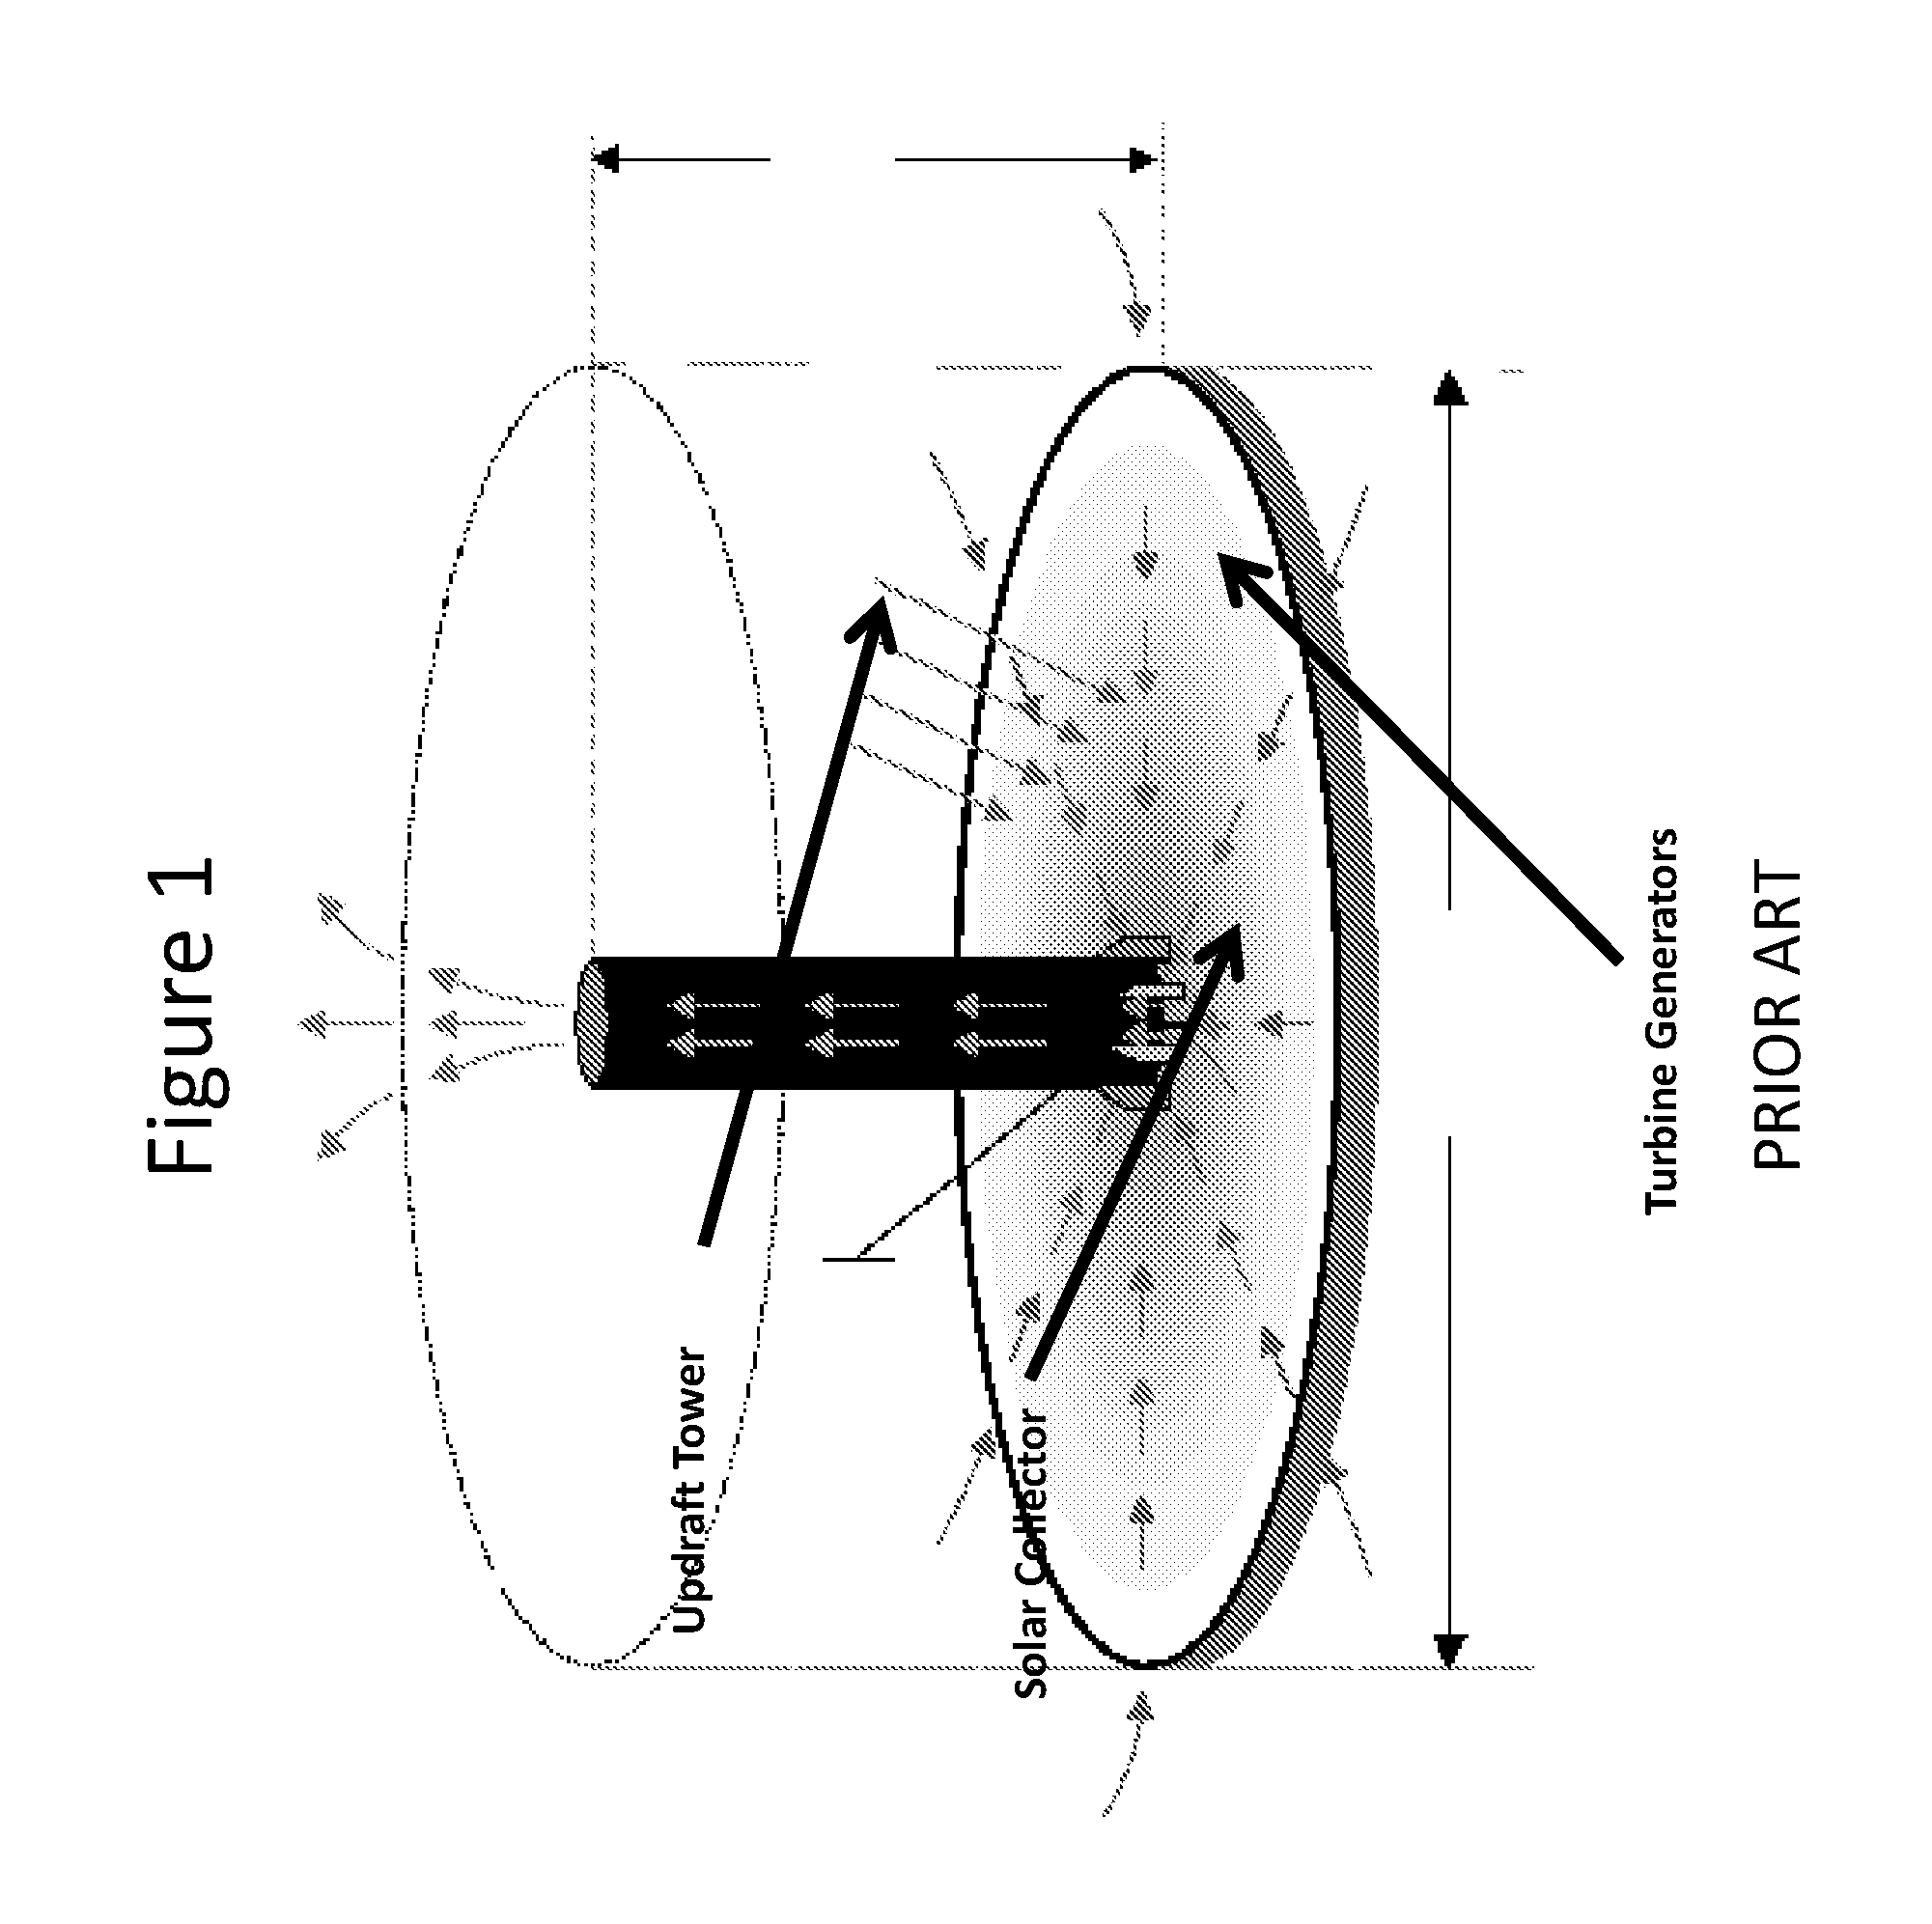 Power tower—system and method of using air flow generated by geothermal generated heat to drive turbines generators for the generation of electricity